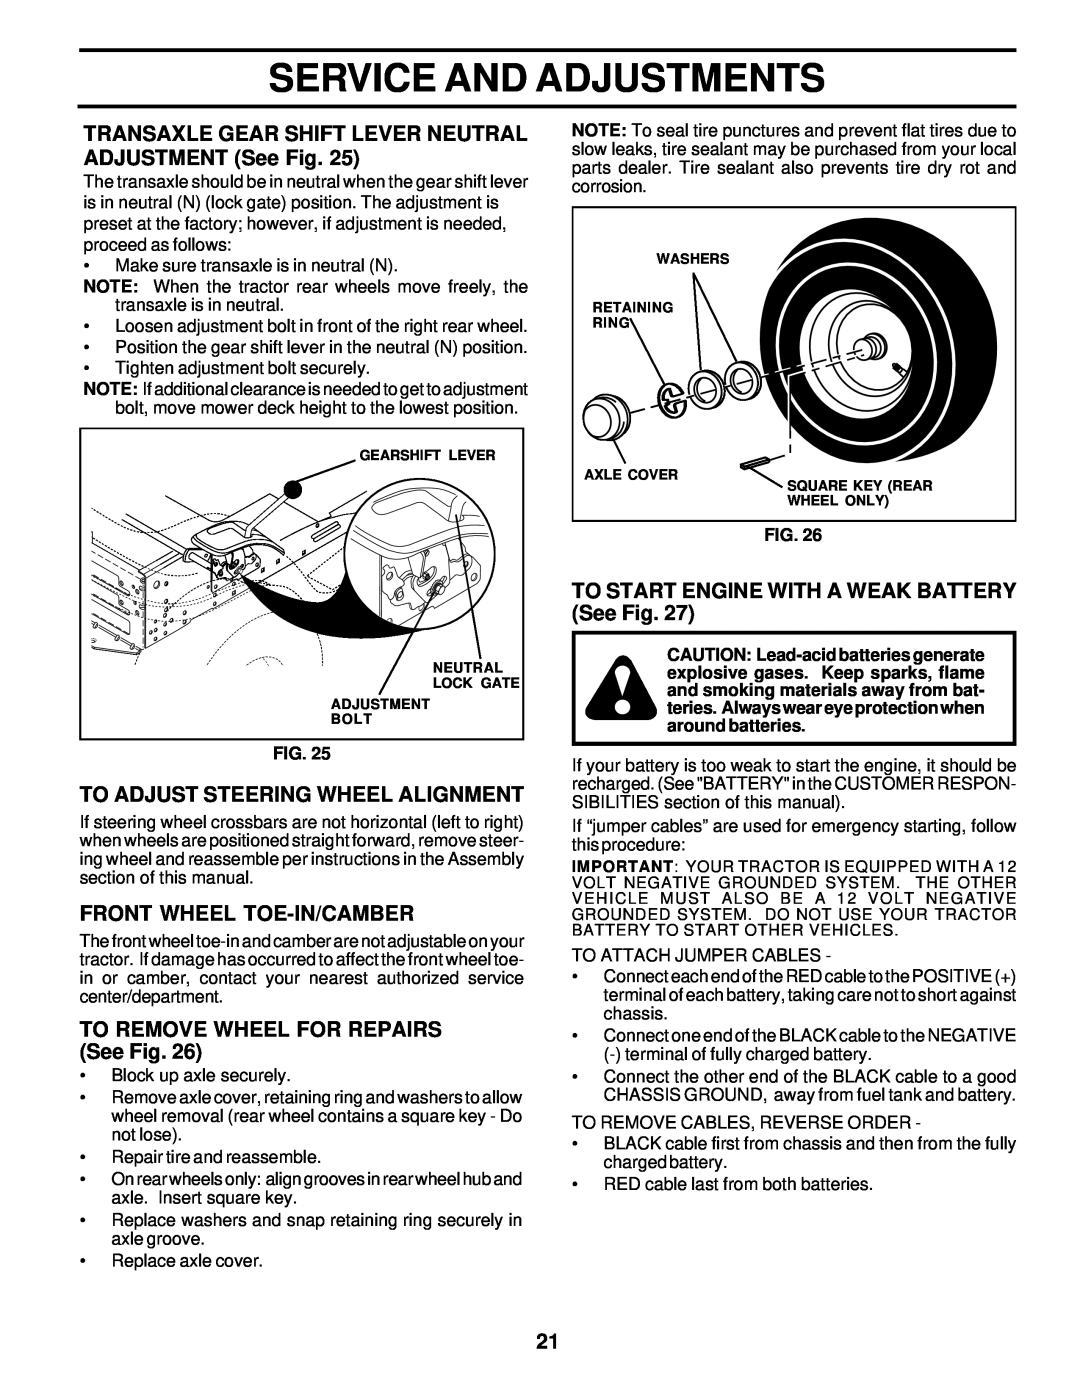 Poulan 177545 owner manual TRANSAXLE GEAR SHIFT LEVER NEUTRAL ADJUSTMENT See Fig, To Adjust Steering Wheel Alignment 